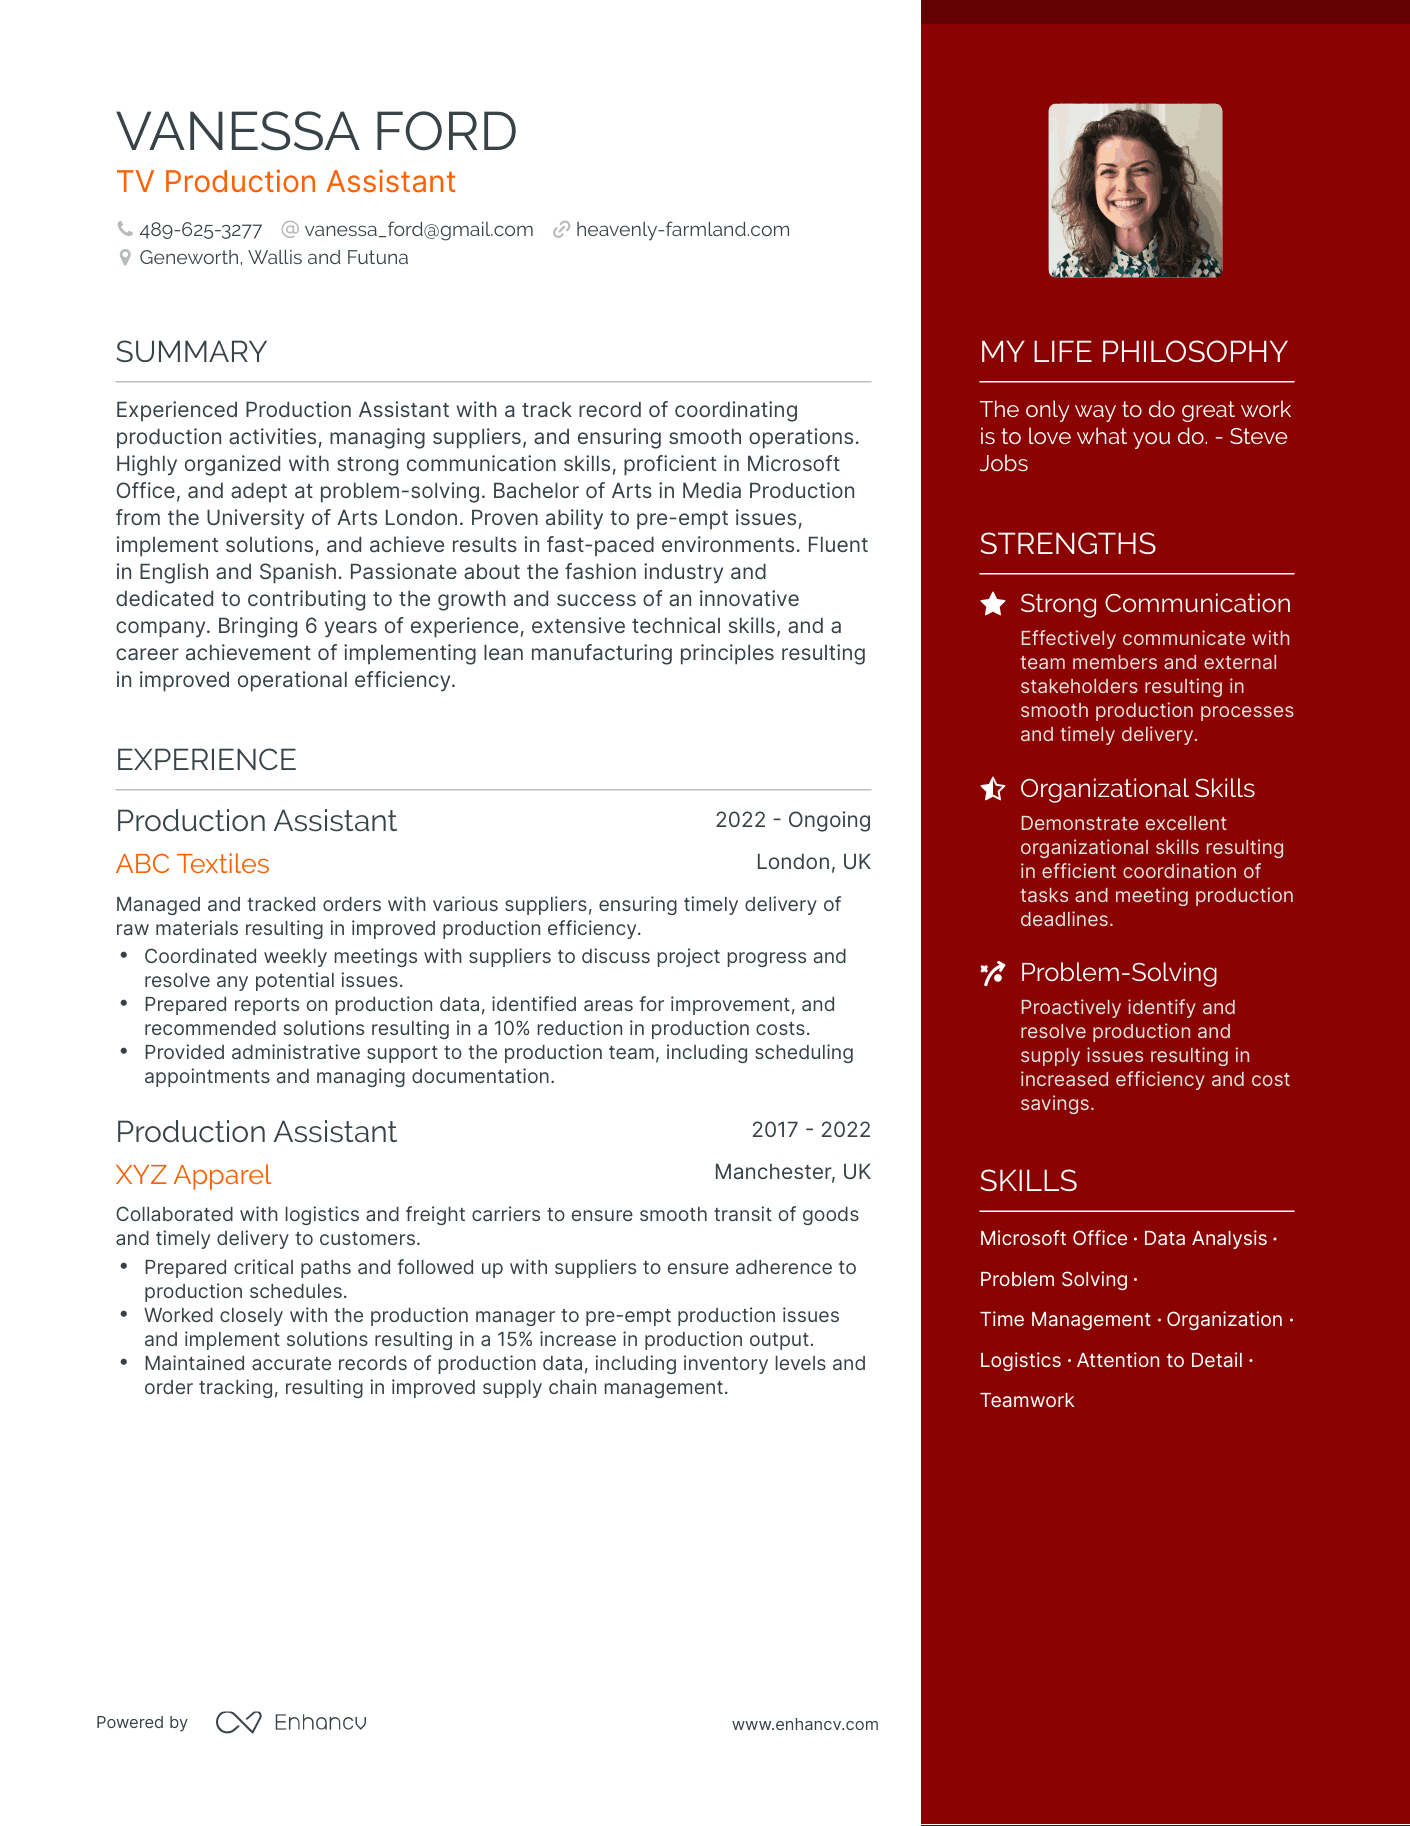 TV Production Assistant resume example